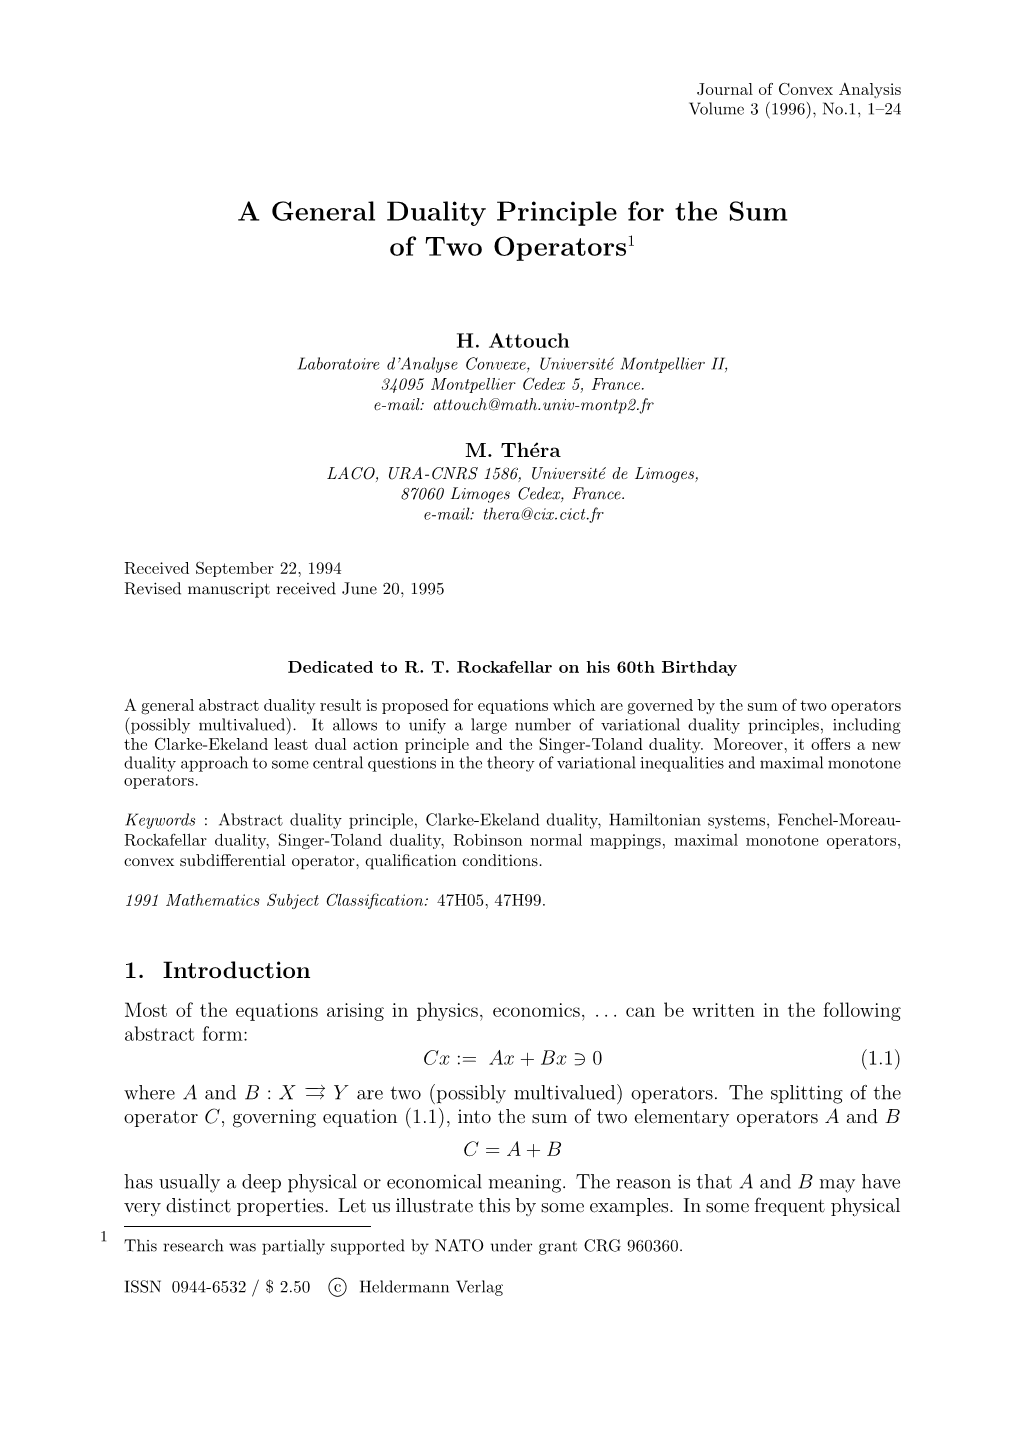 A General Duality Principle for the Sum of Two Operators1